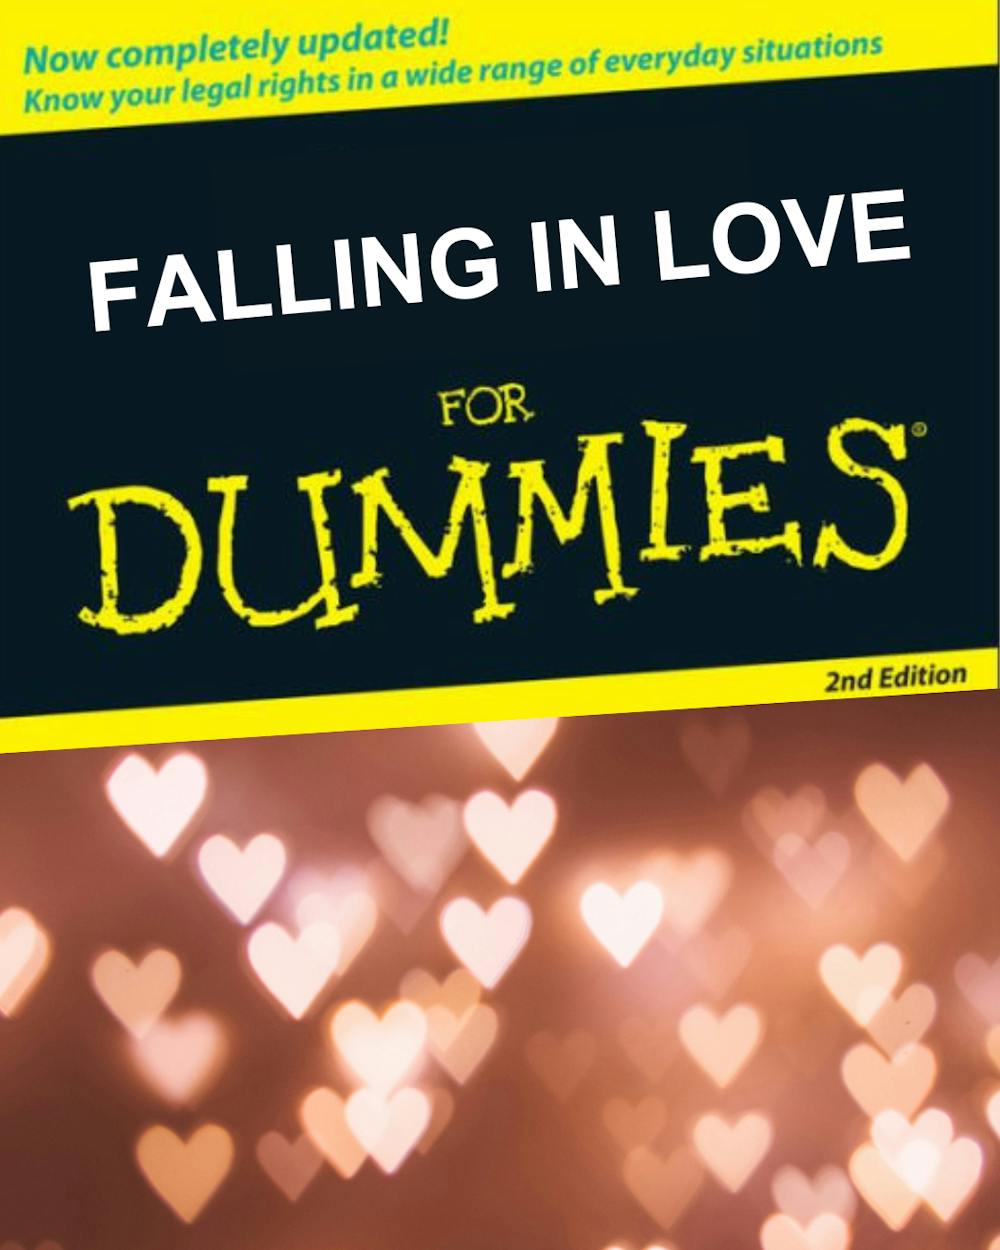 Falling in love for dummies - 1